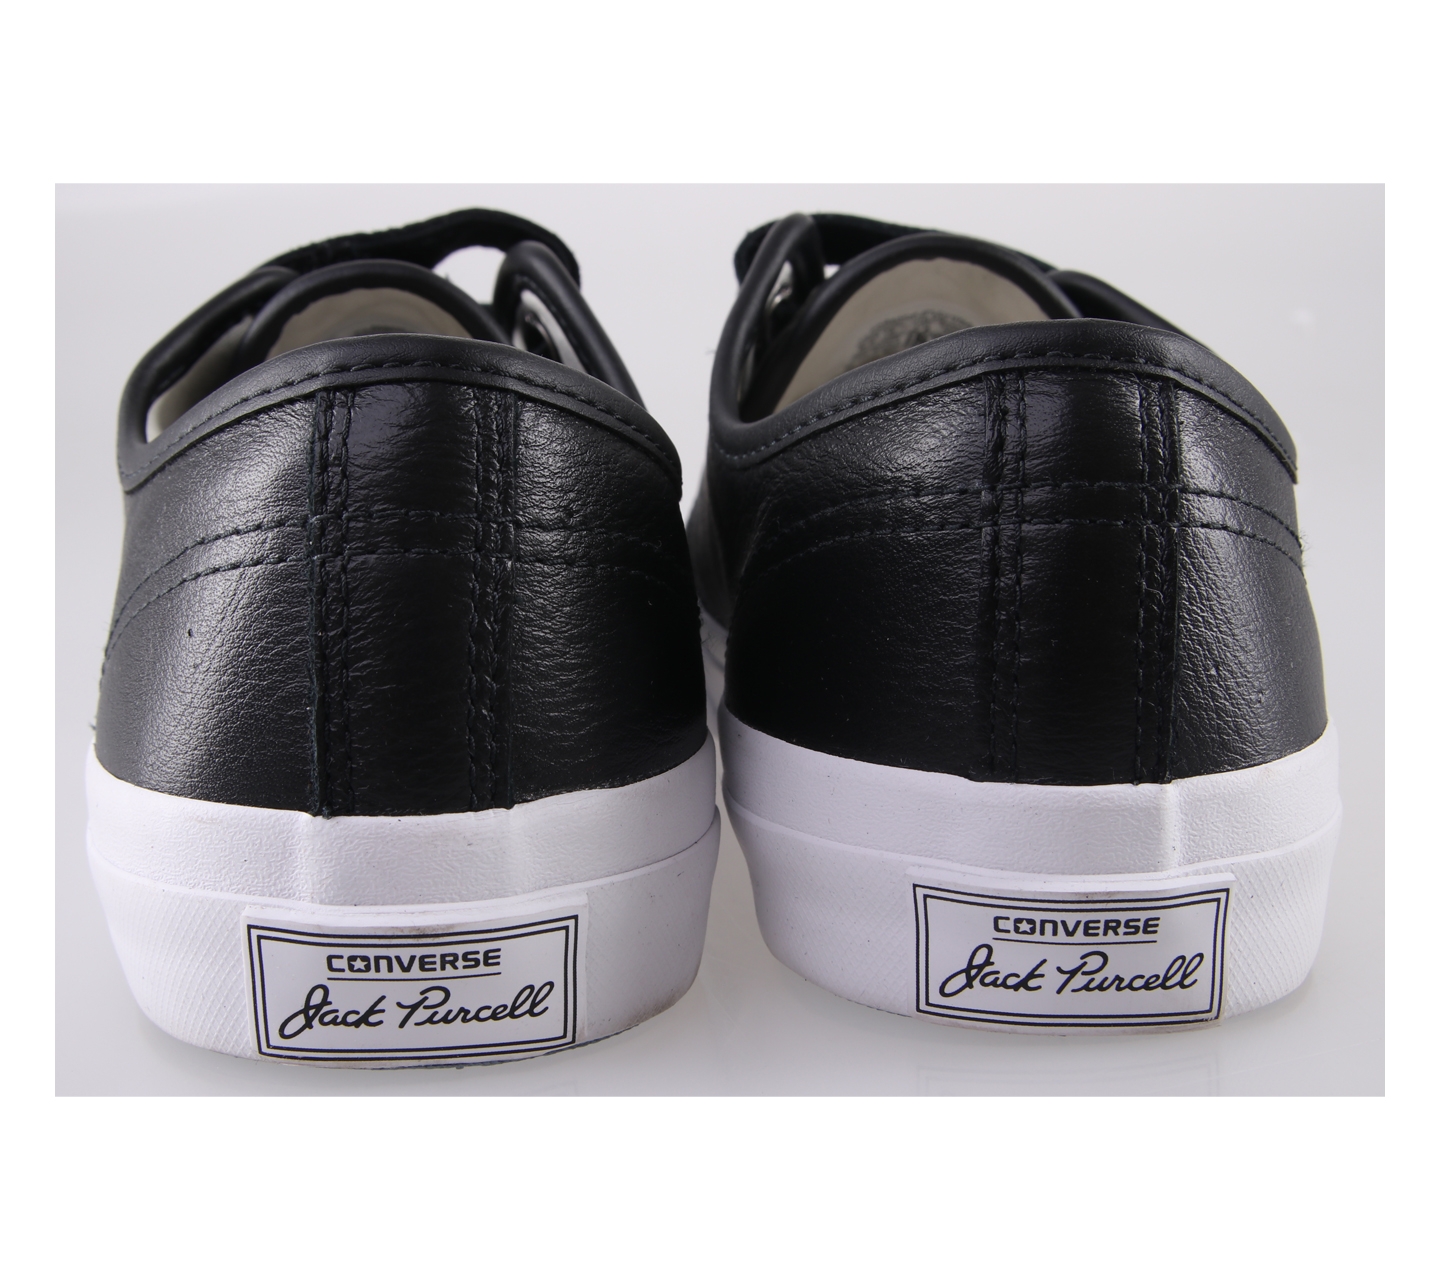 Converse Black And White Jack Purcell 3V Strap Sneakers